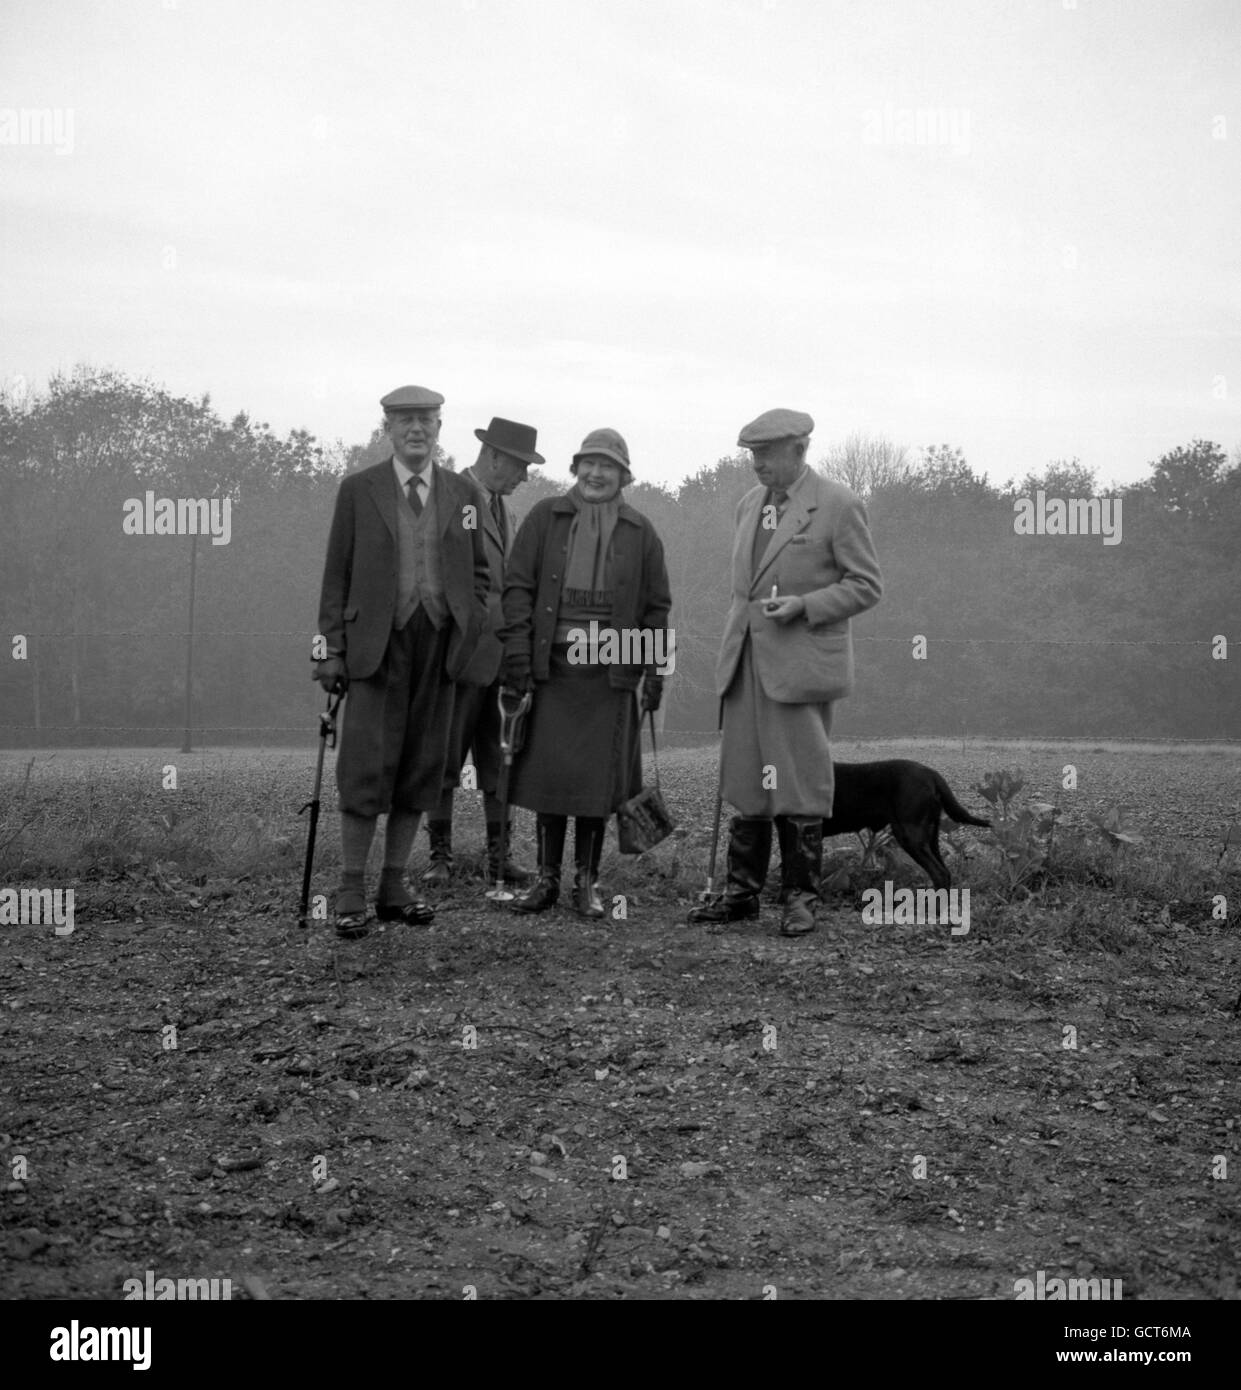 Prime Minister Harold Macmillan (left), wearing plus-fours and spats, seems to be sharing a light-hearted joke with Sir Thomas (right) and Lady Sopwith while out shooting at Broadlands, Romsey, Hampshire. Stock Photo